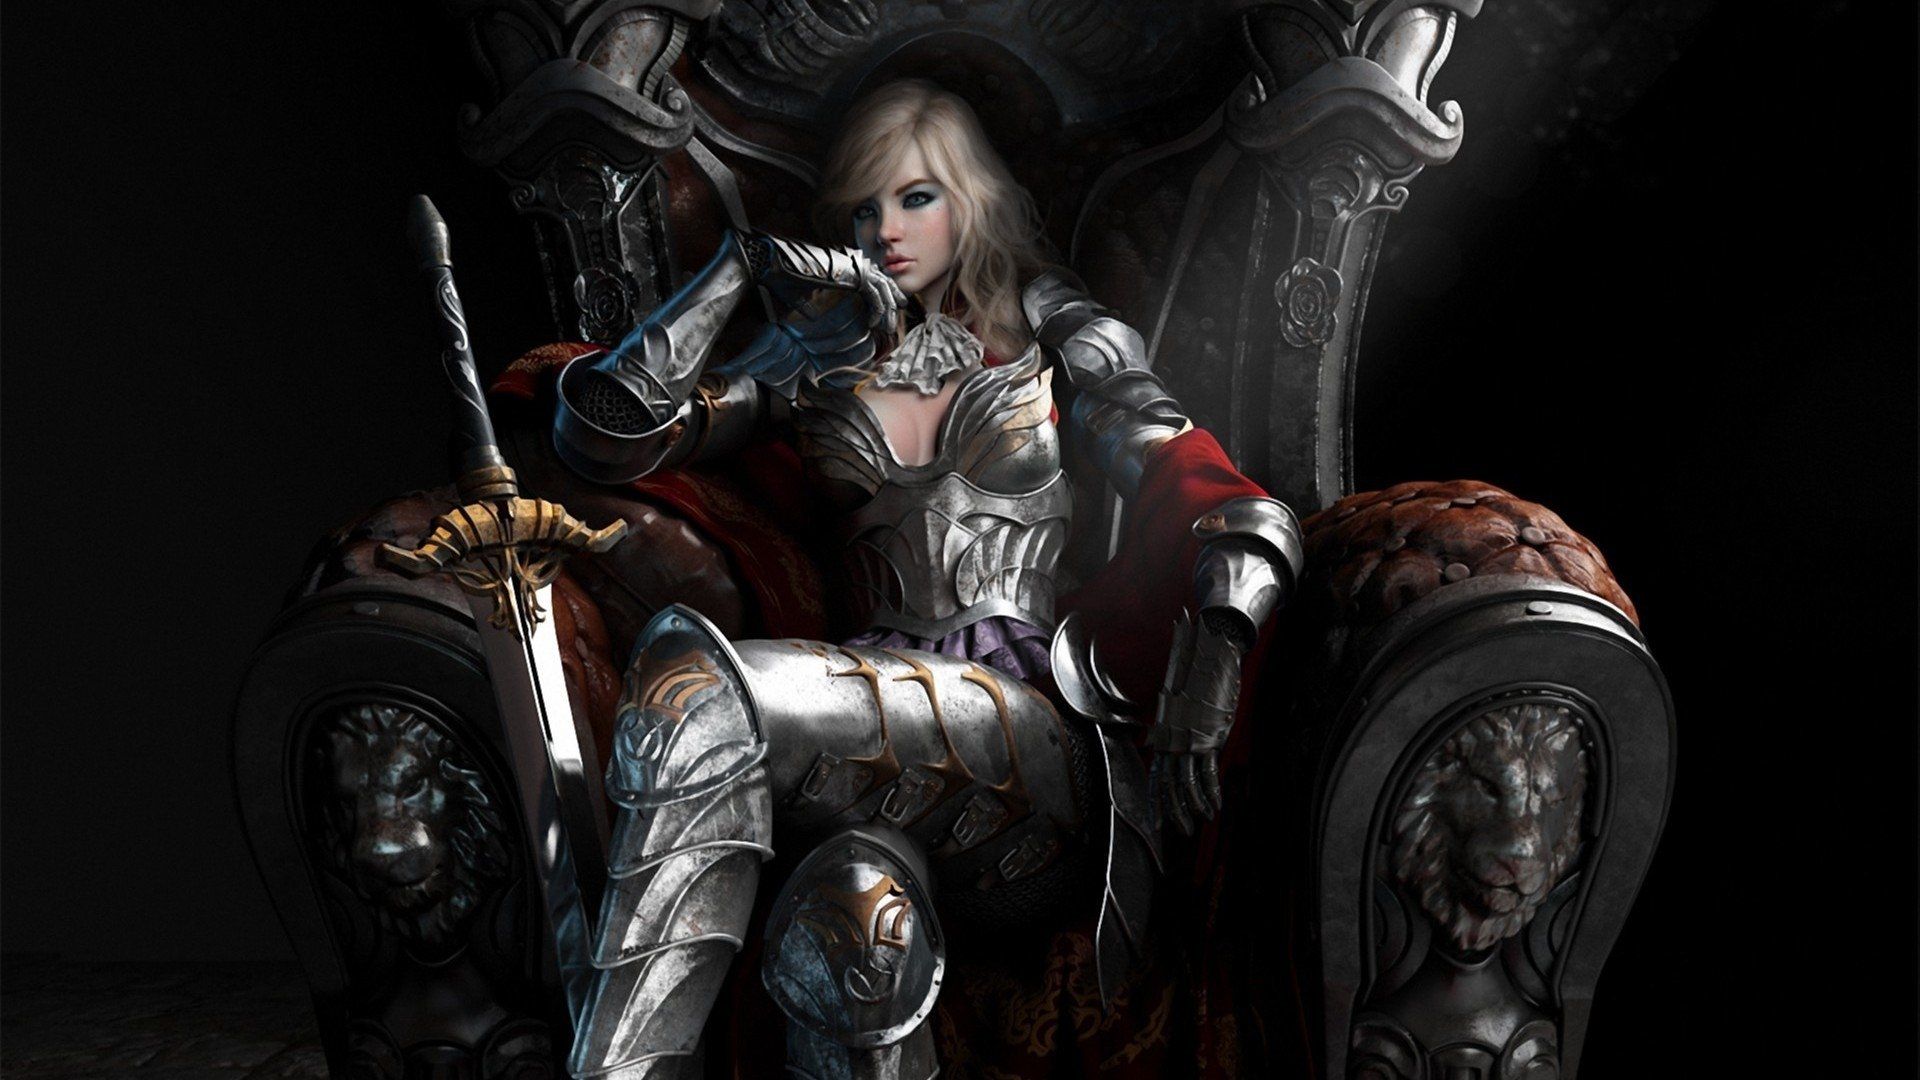 Female Warrior Wallpapers   Top Free Female Warrior Backgrounds